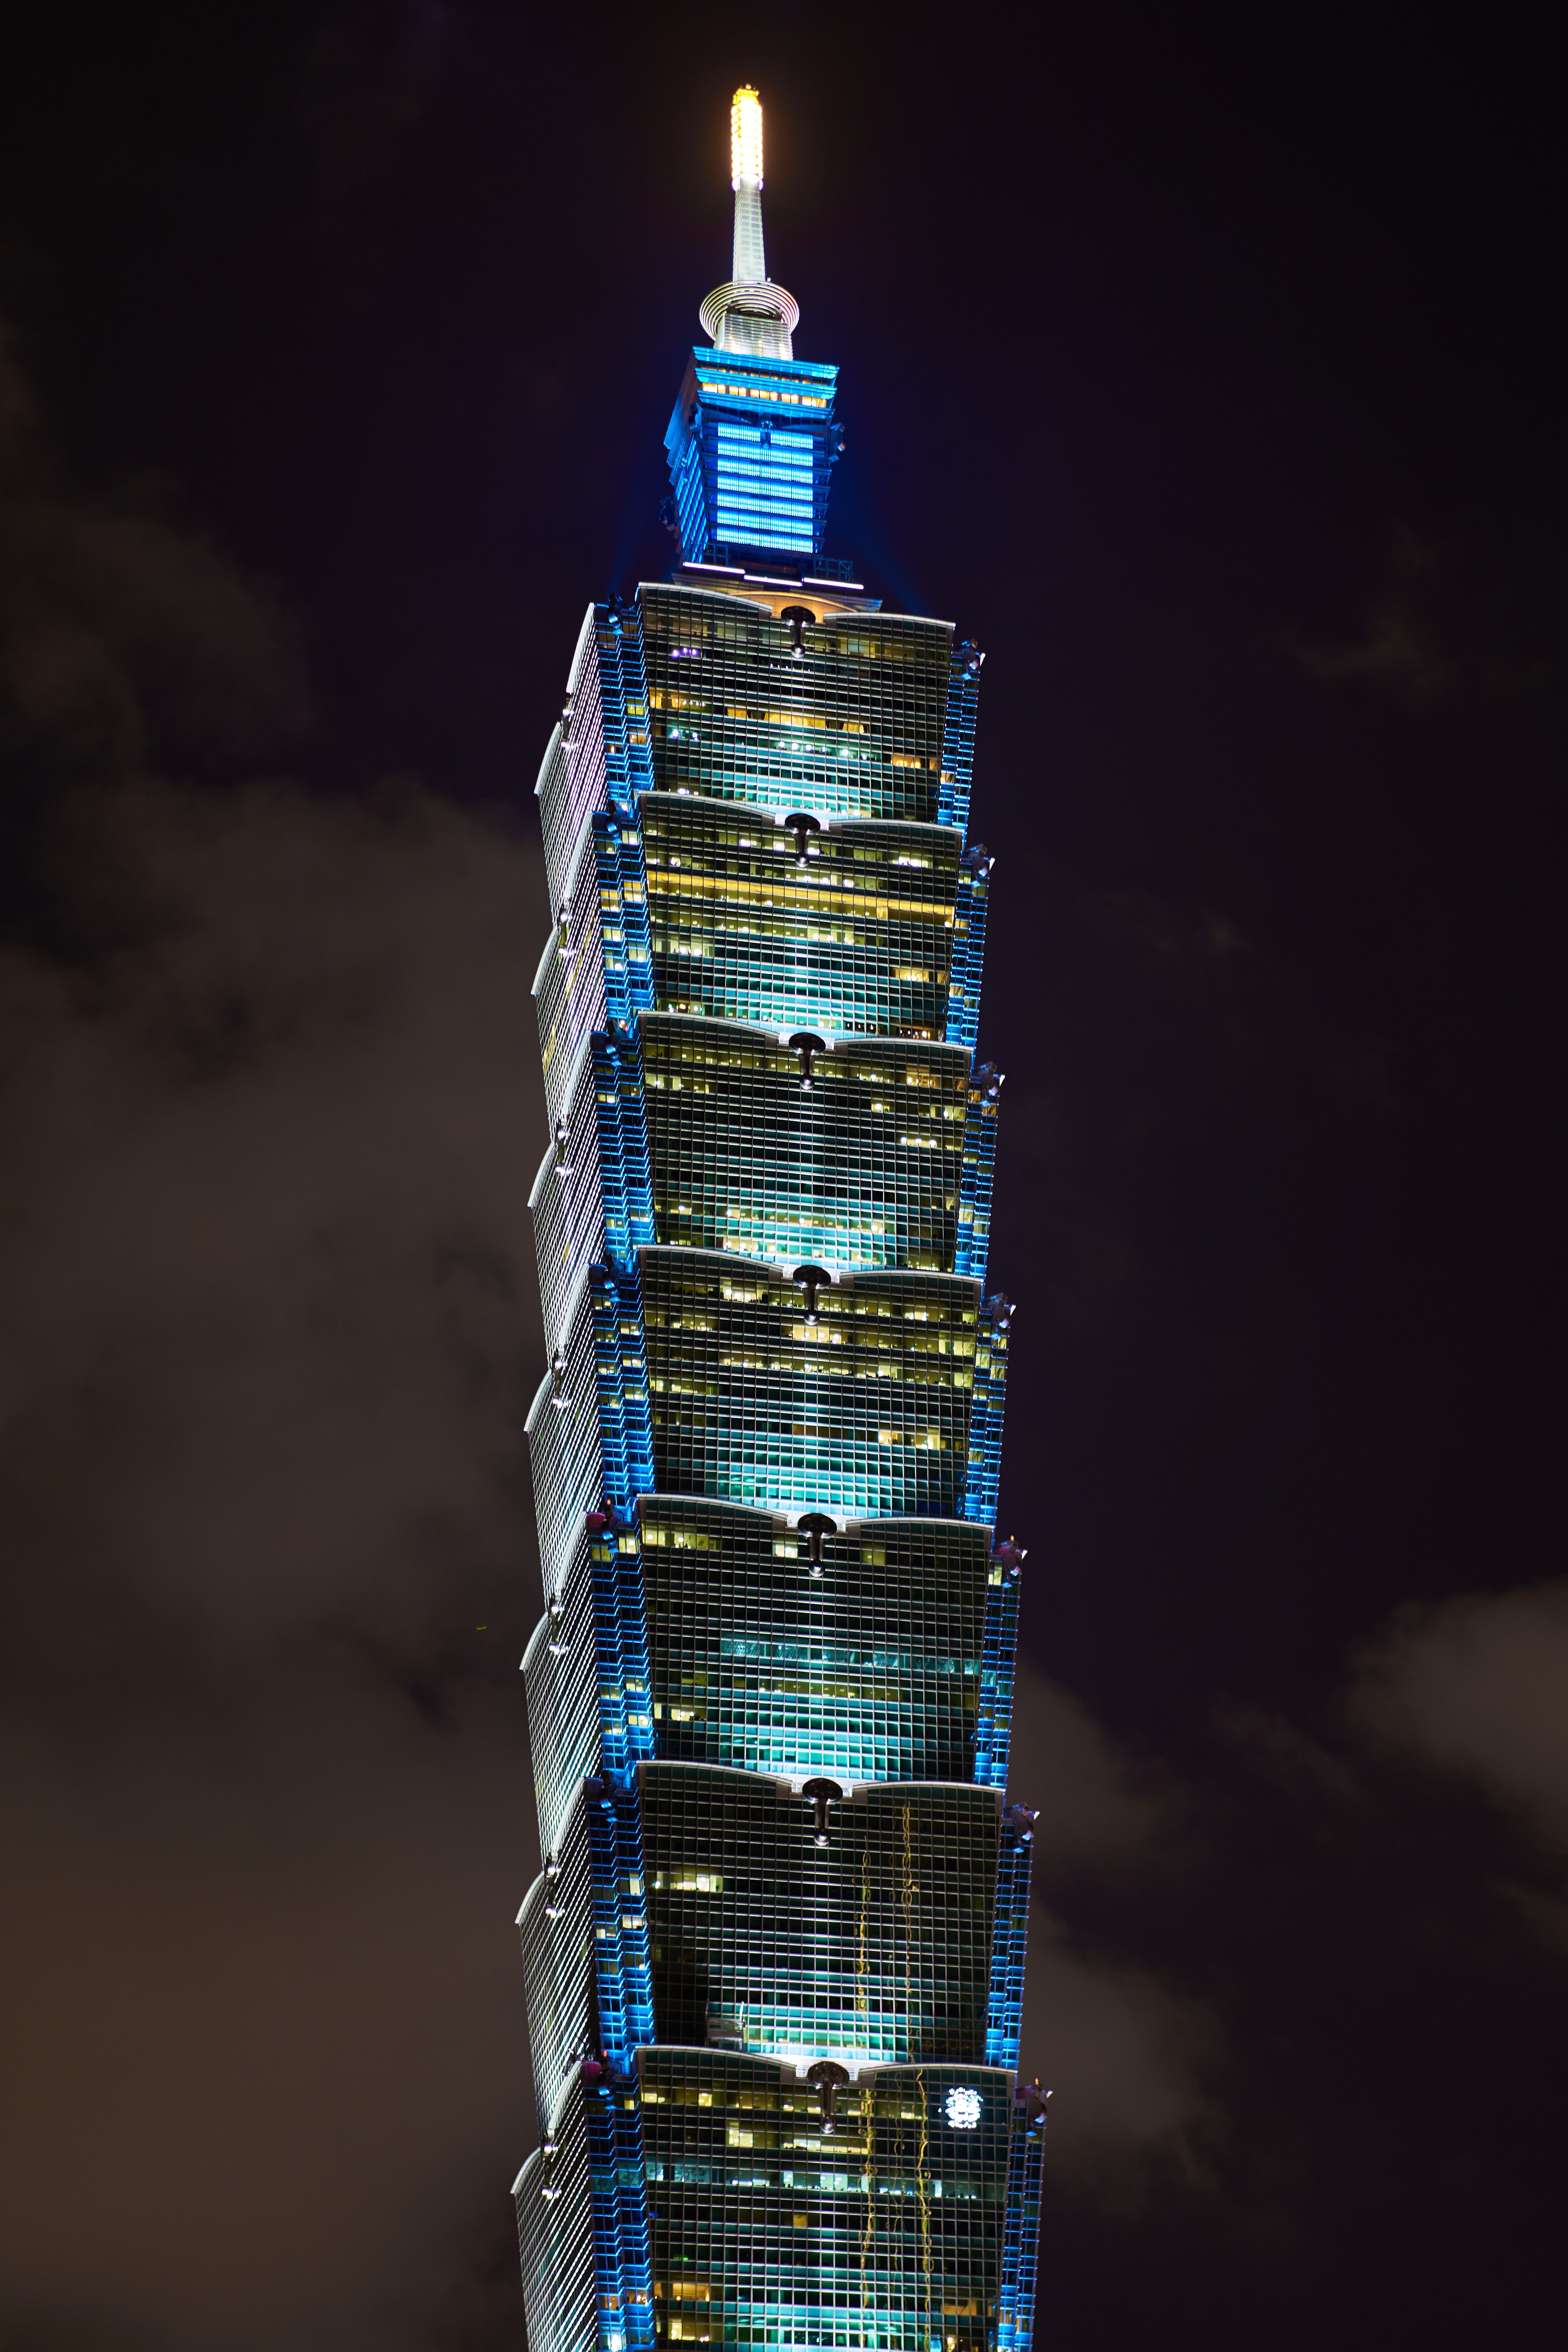 china, architecture, city lights, cities, skyscraper, night city, tower, taipei wallpaper for mobile